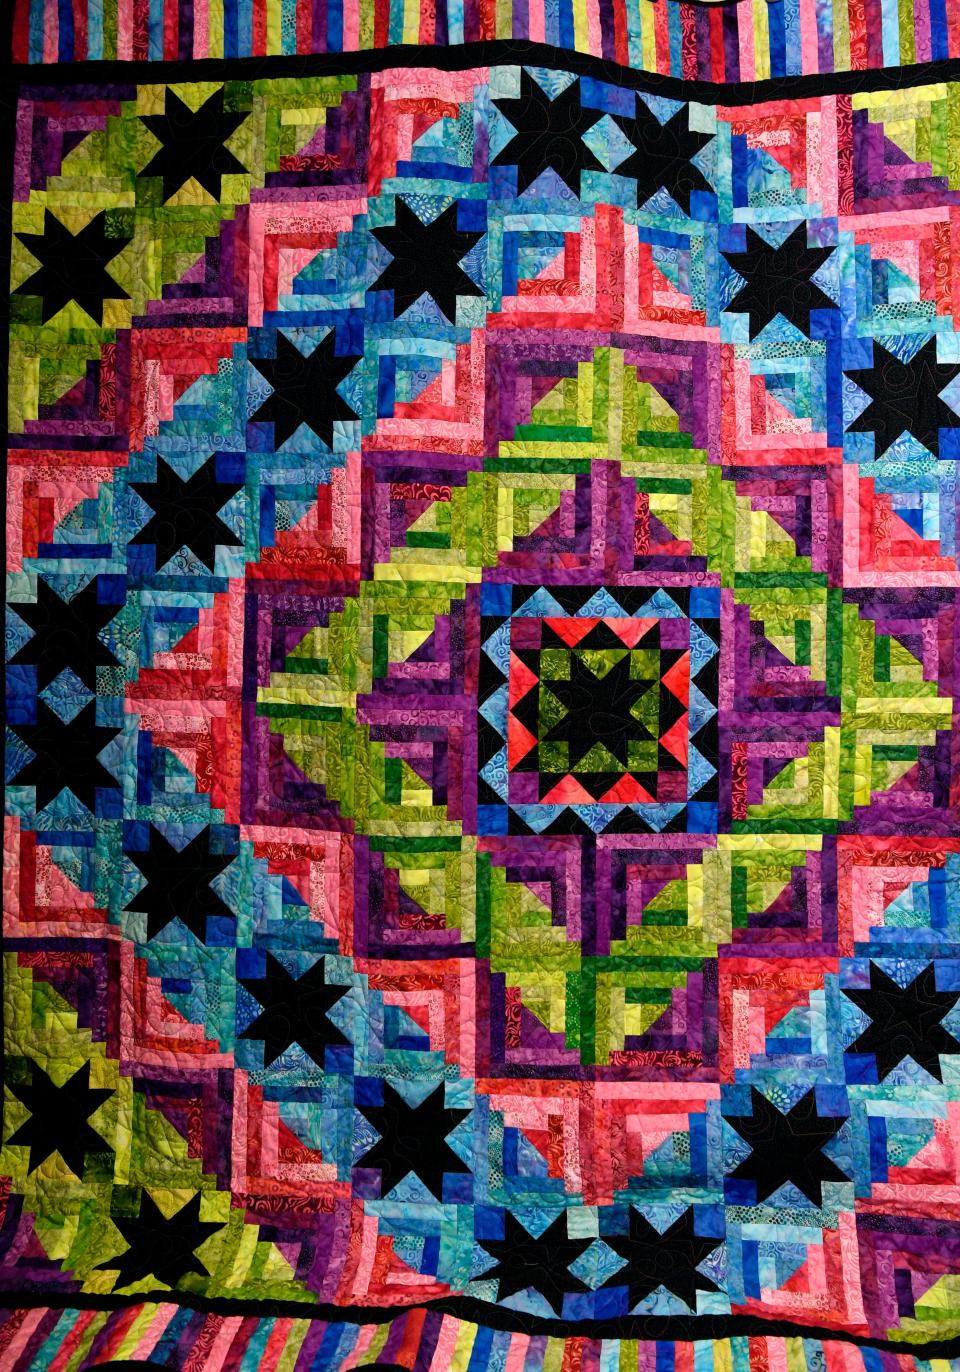 The quilt show is back at the Abilene Convention Center this weekend.